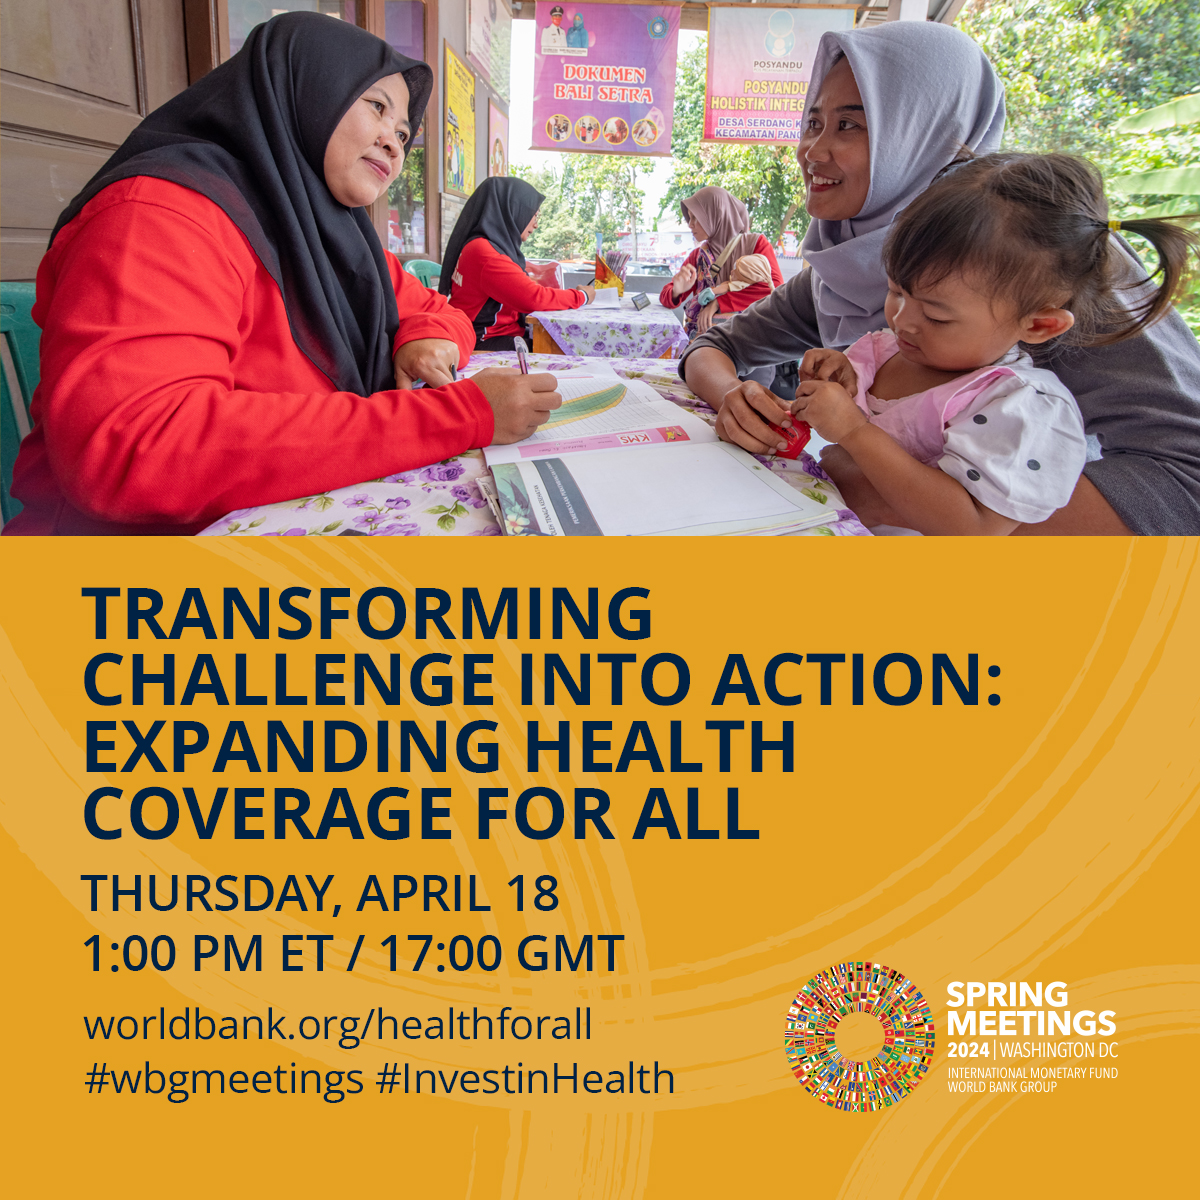 This week, discover how @WorldBank collaborates with nations and partners to tackle #healthsystem hurdles, & the journey towards expanding access to quality, affordable #healthcare worldwide. 🩺

View the schedule of events: wrld.bg/gS6050RfrRB #HealthForAll #WBGMeetings